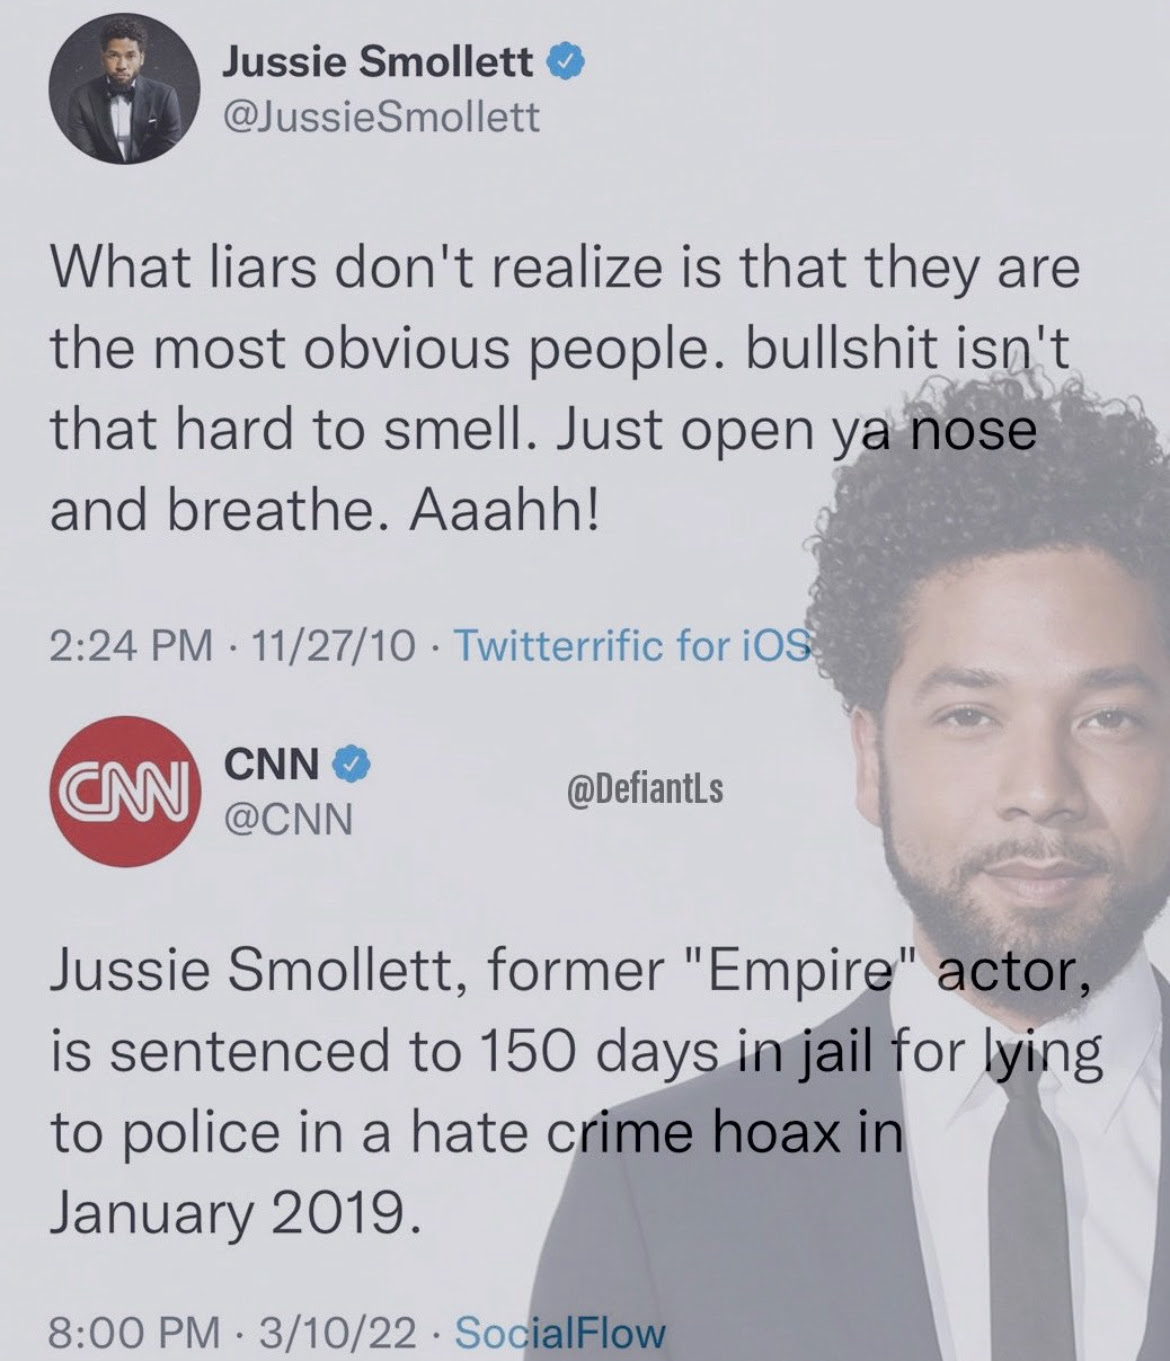 Hypocrite: Jussie Smollett for saying it is easy to spot BS then aressted and sentenced to jail for being a BSer.